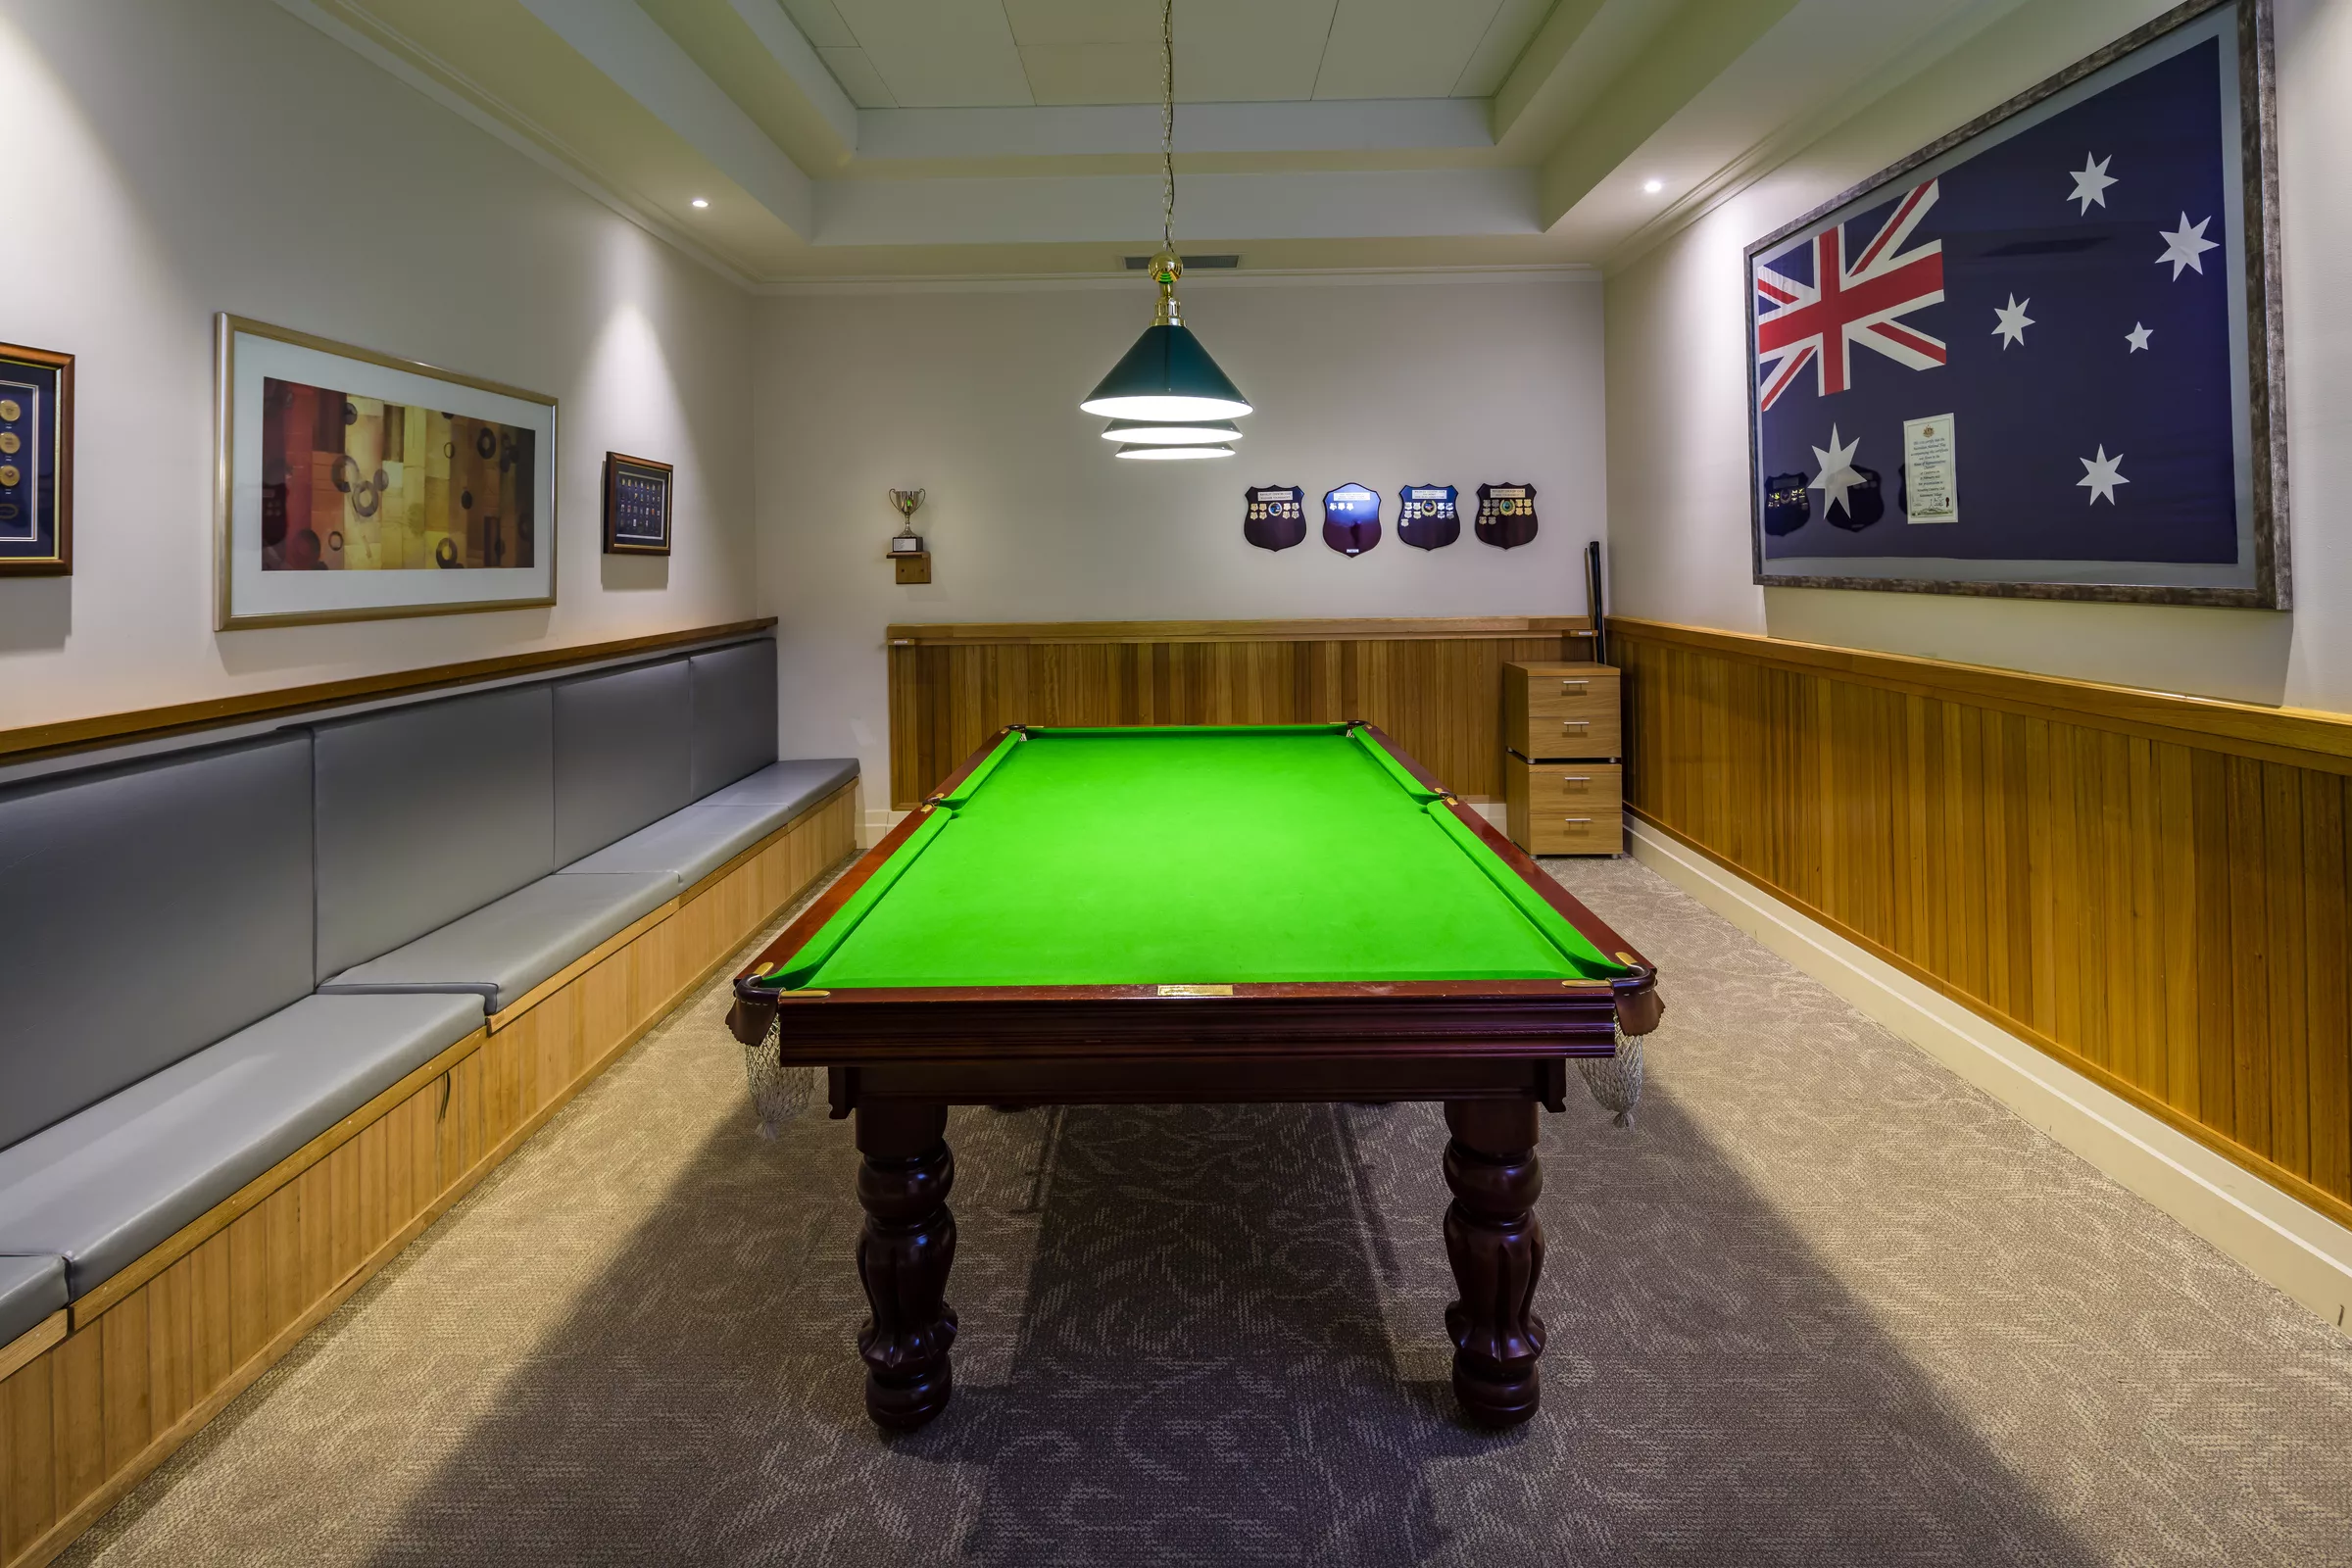 Waverley Country Club room with pool table and framed Australian flag on the wall